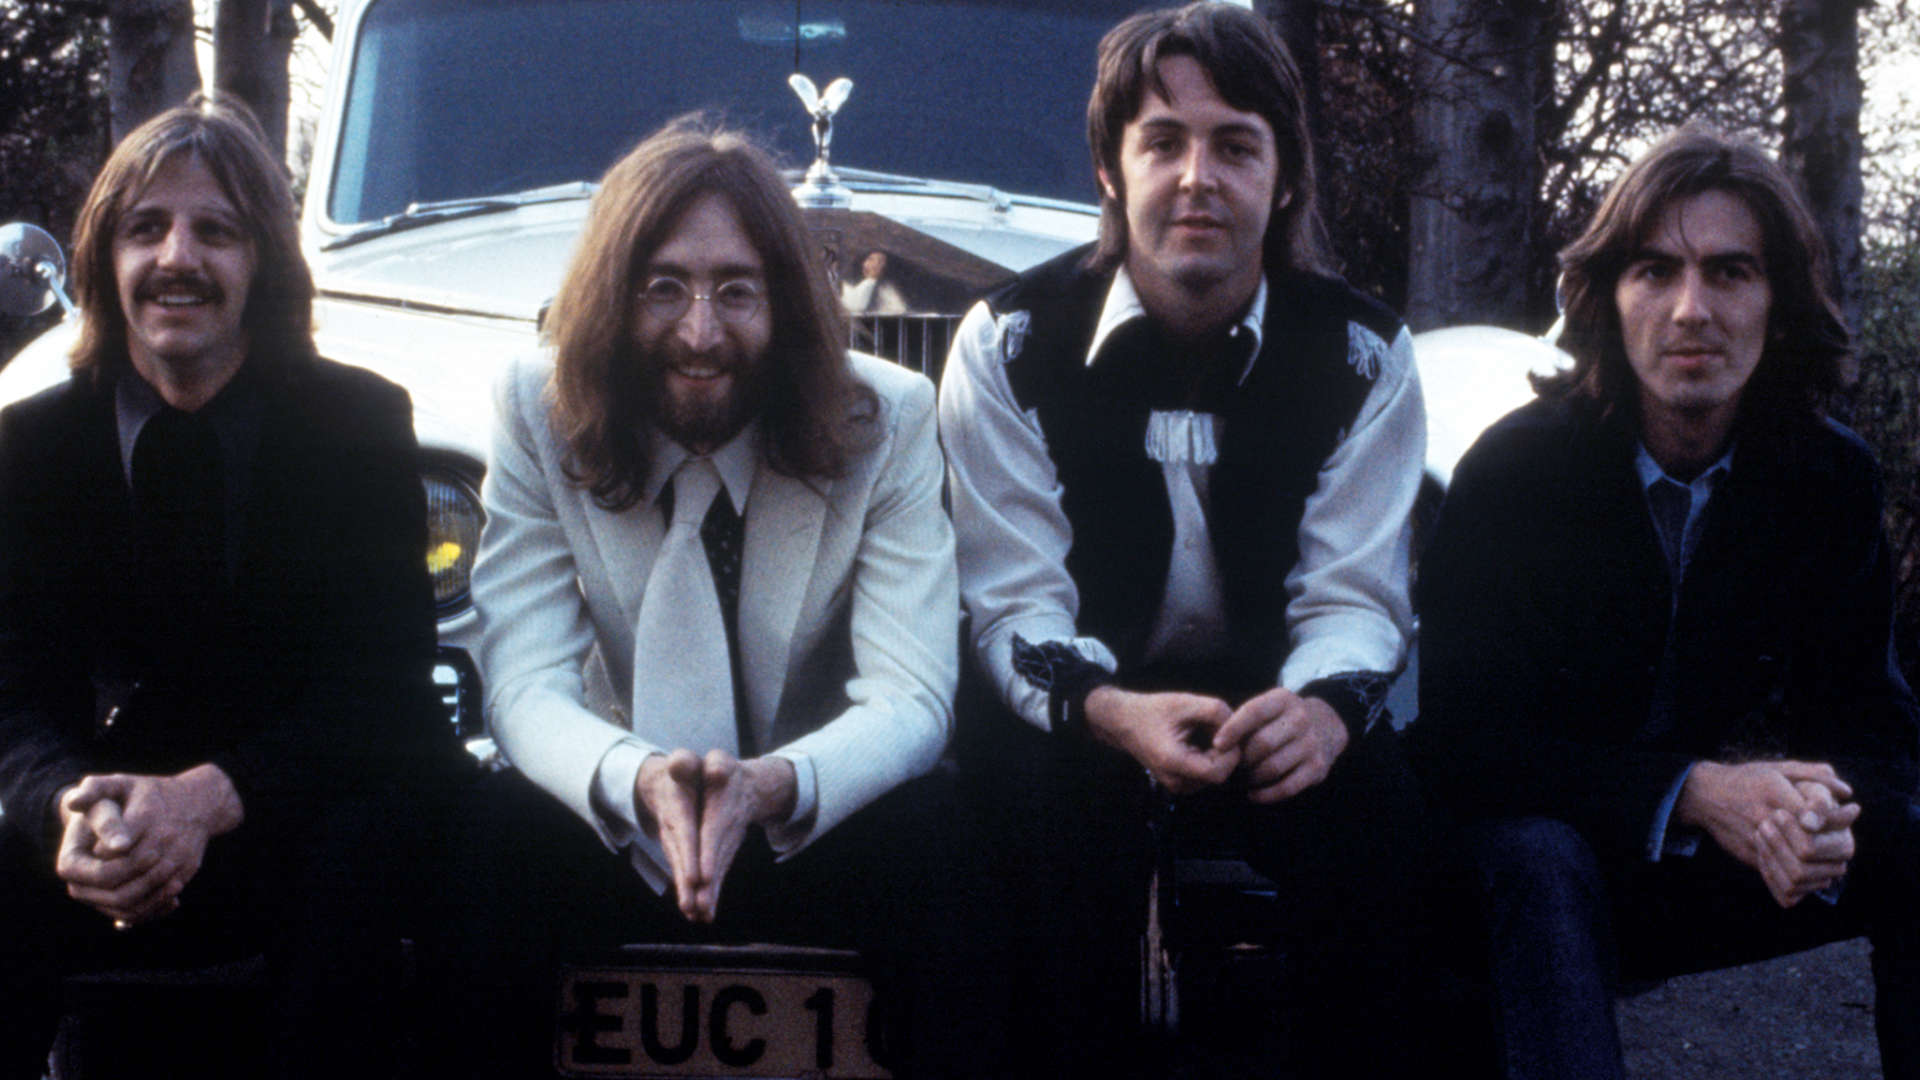 The Beatles sitting on a car